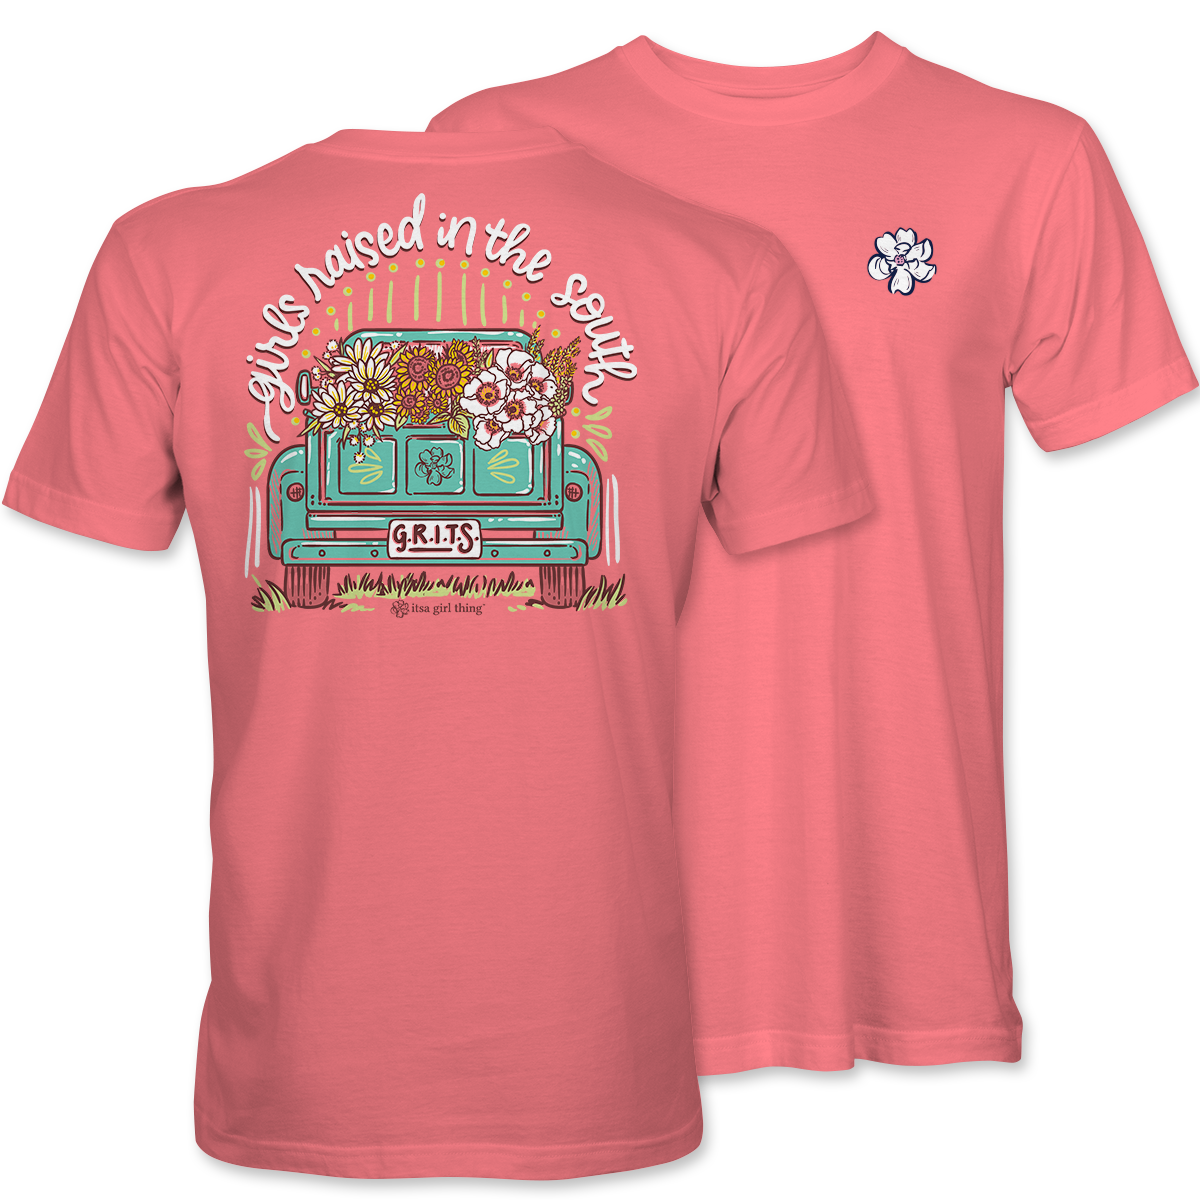 GRITS Truck - Girls Raised In The South T-Shirt in Coral